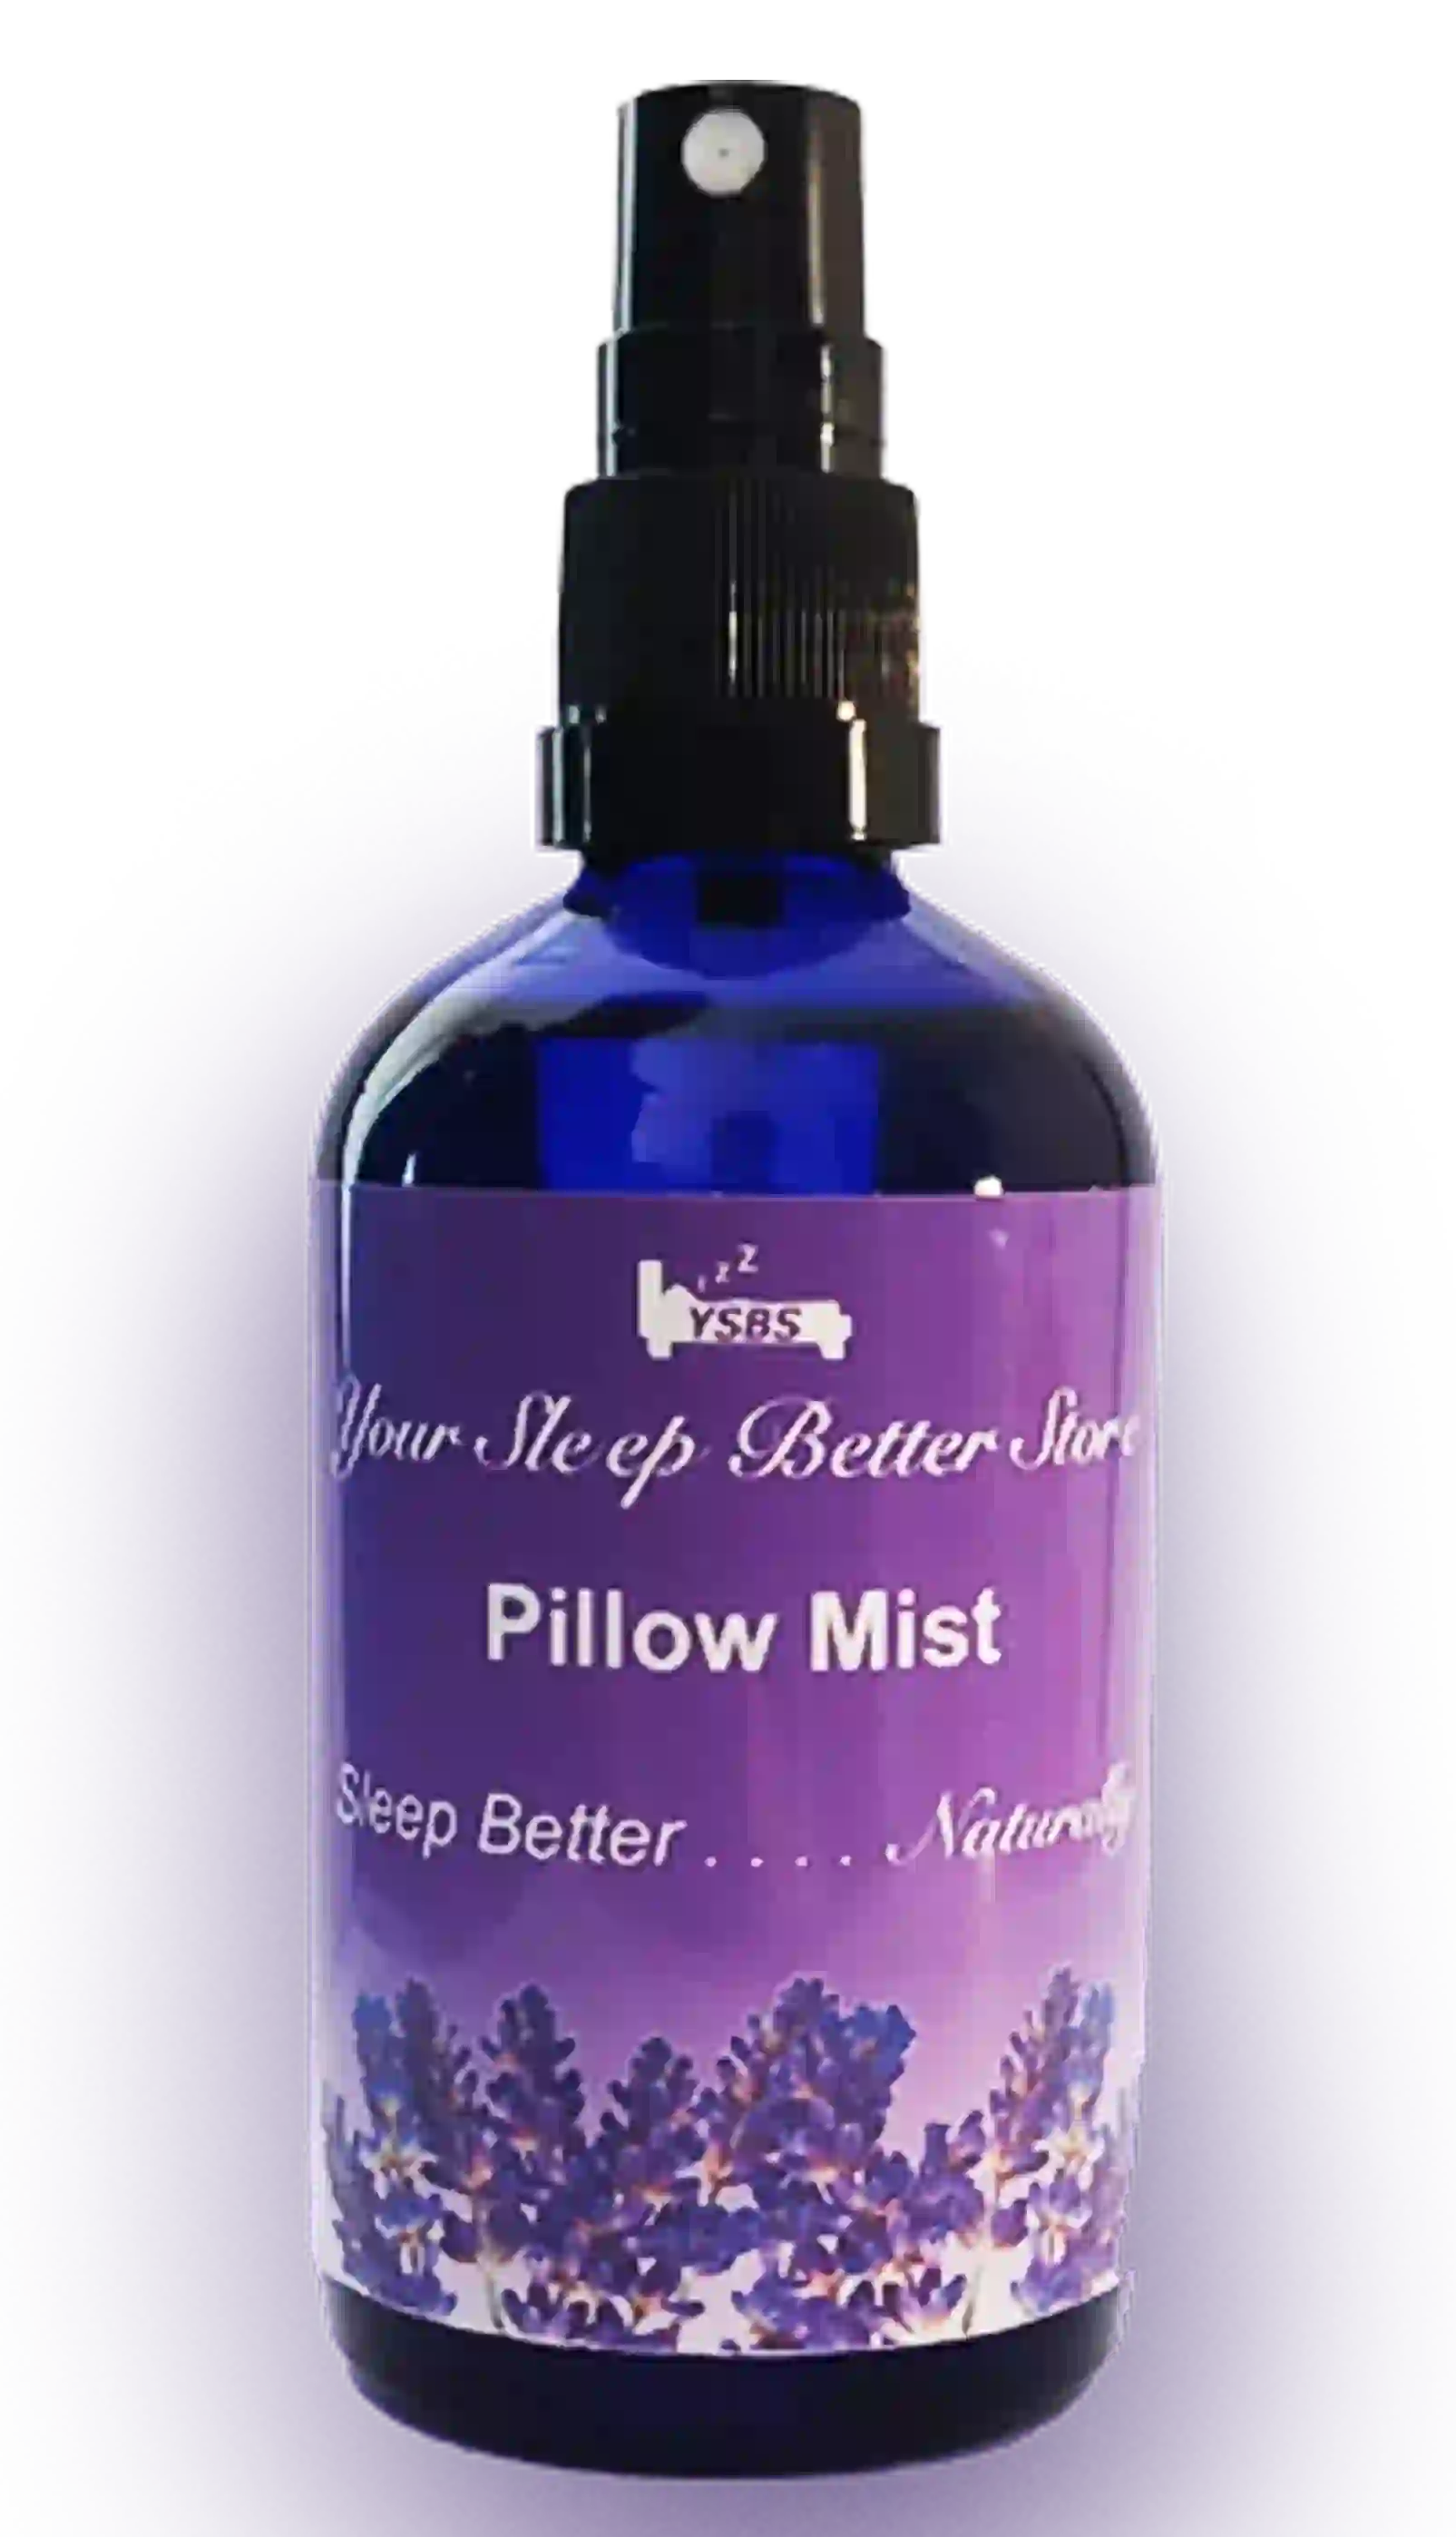 Your Sleep Better Store - helping against sleeping issues like insomnia, snoring, plus sleep problems related to fibromyalgia and the menopause